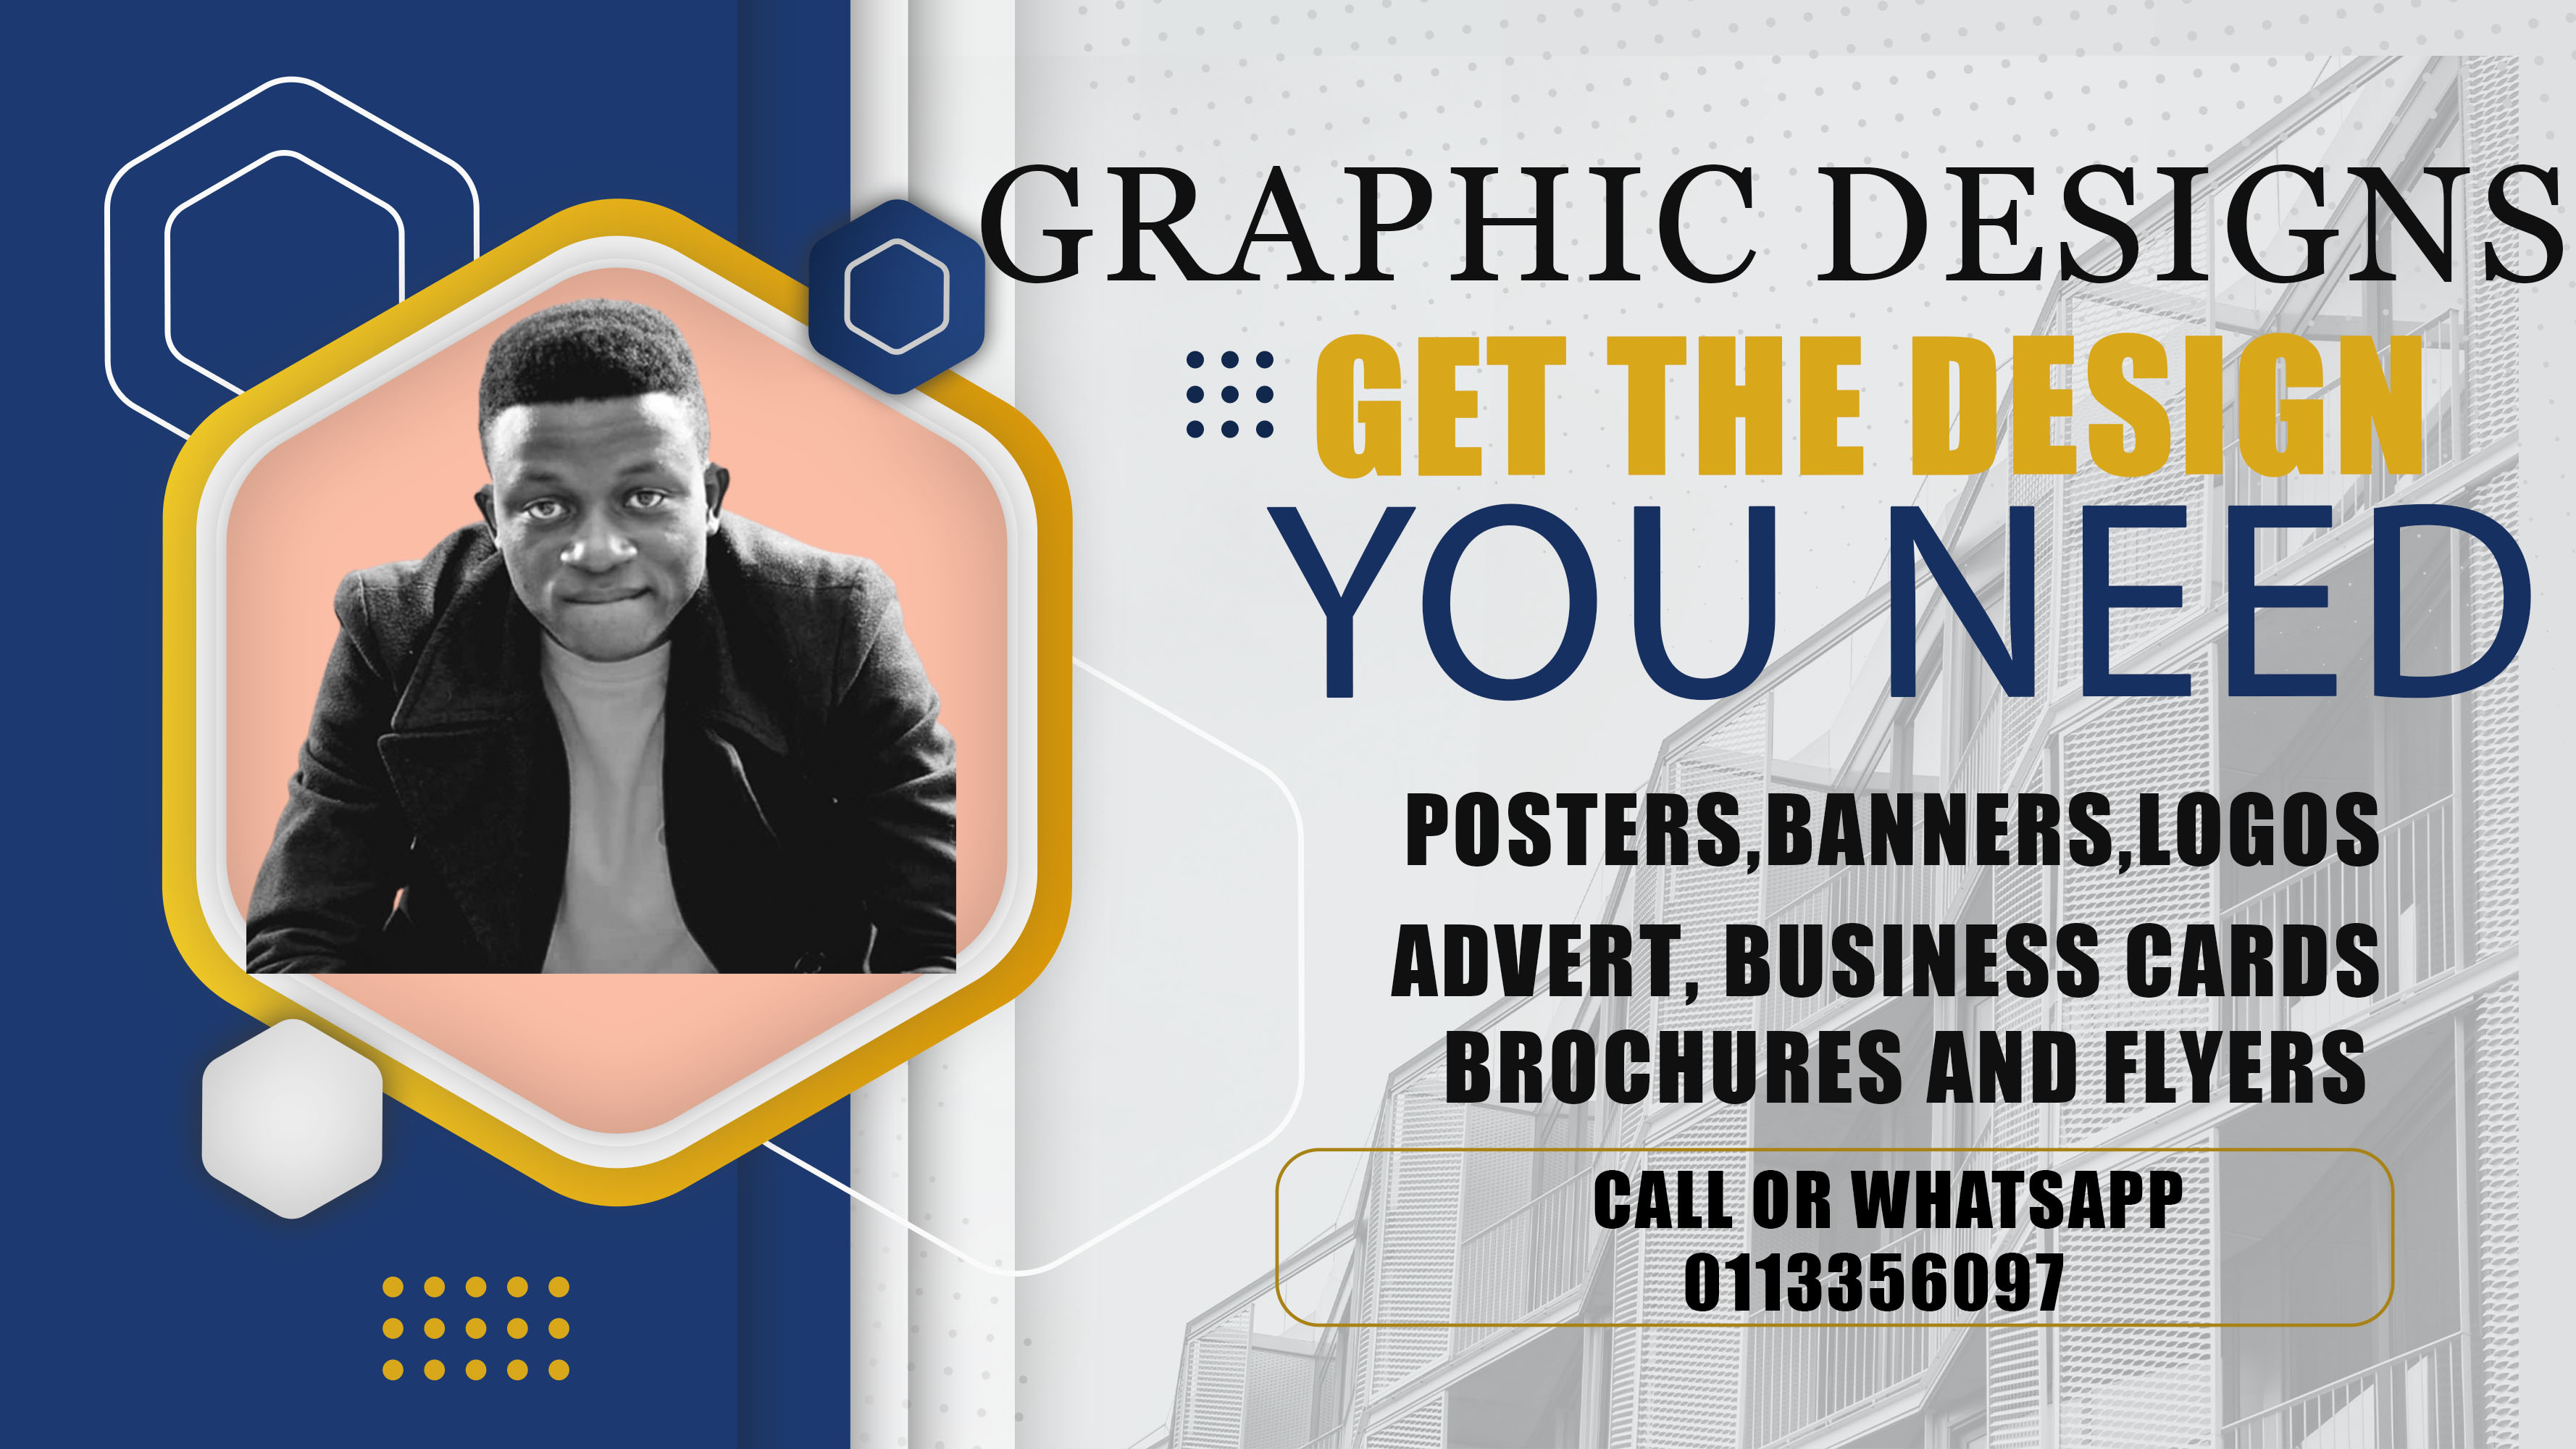 fee HEL DESIGNS

"YOU NEED

POSTERS, BANNERS LOGOS
ADVERT, BUSINESS CARDS
BROCHURES AND FLYERS

CALL OR WHATSAPP
0113356097